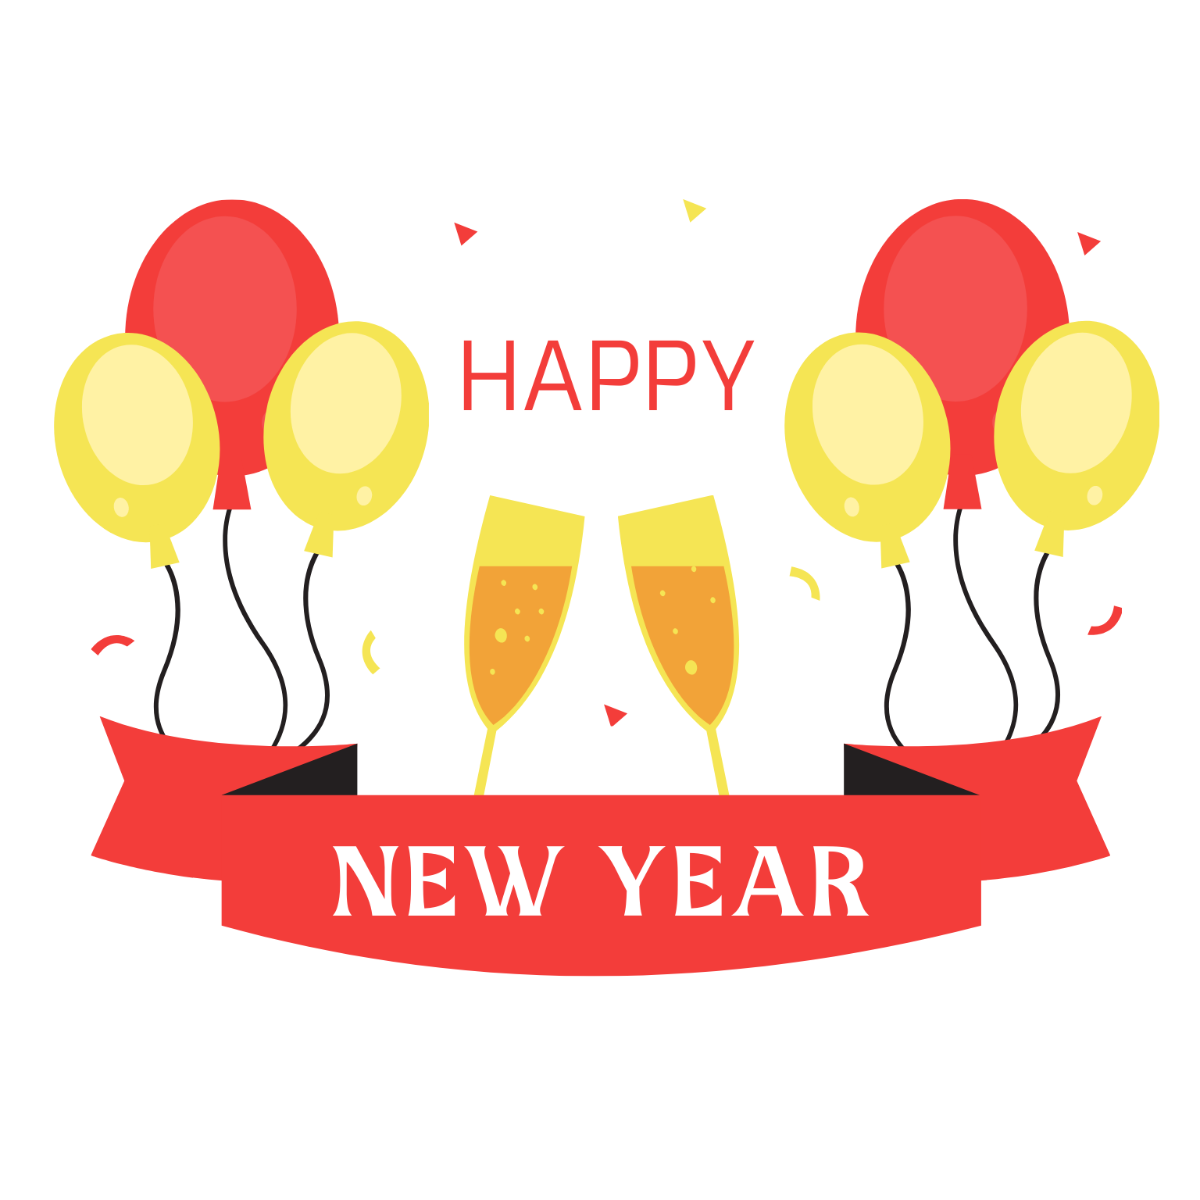 Free new year designs documents